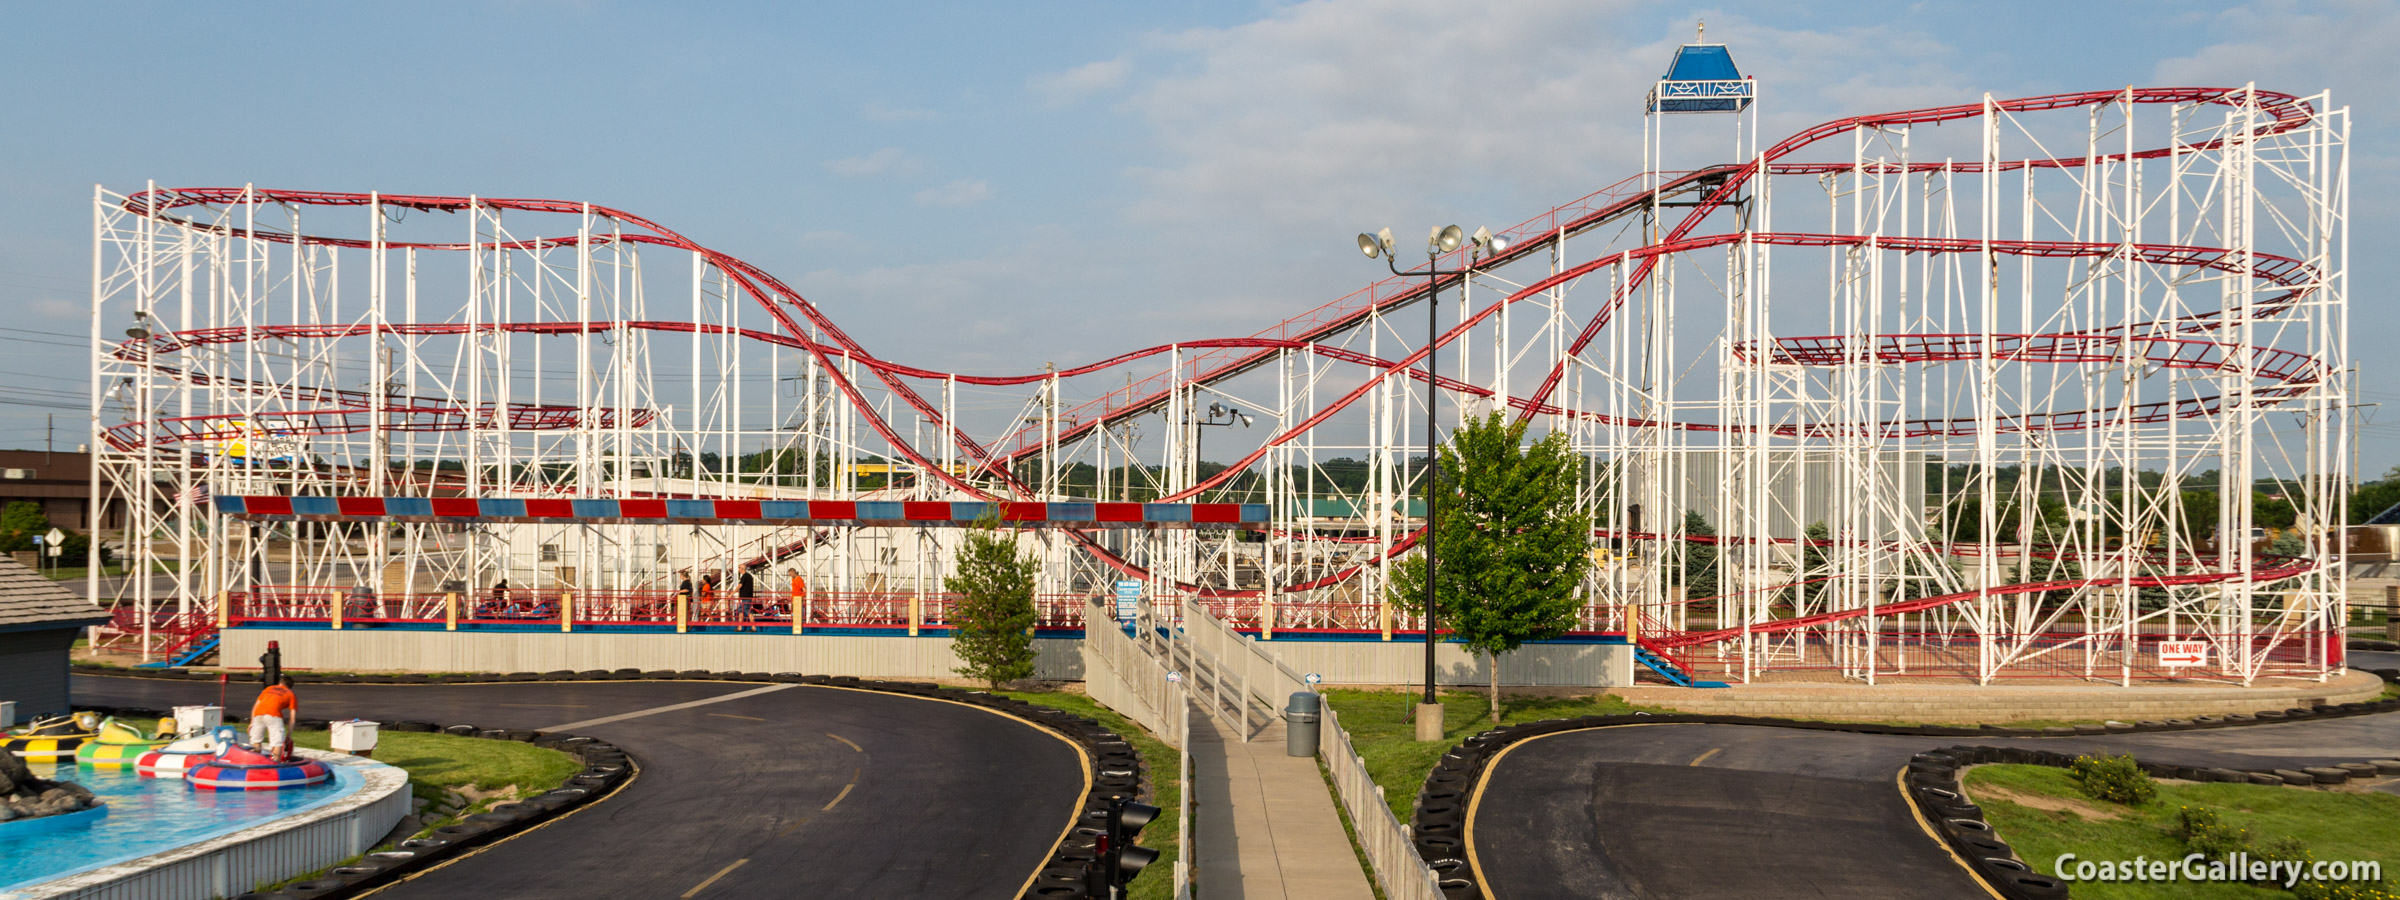 Panorama of the Big Ohhhh! coaster and go-kart track at the Fun-Plex